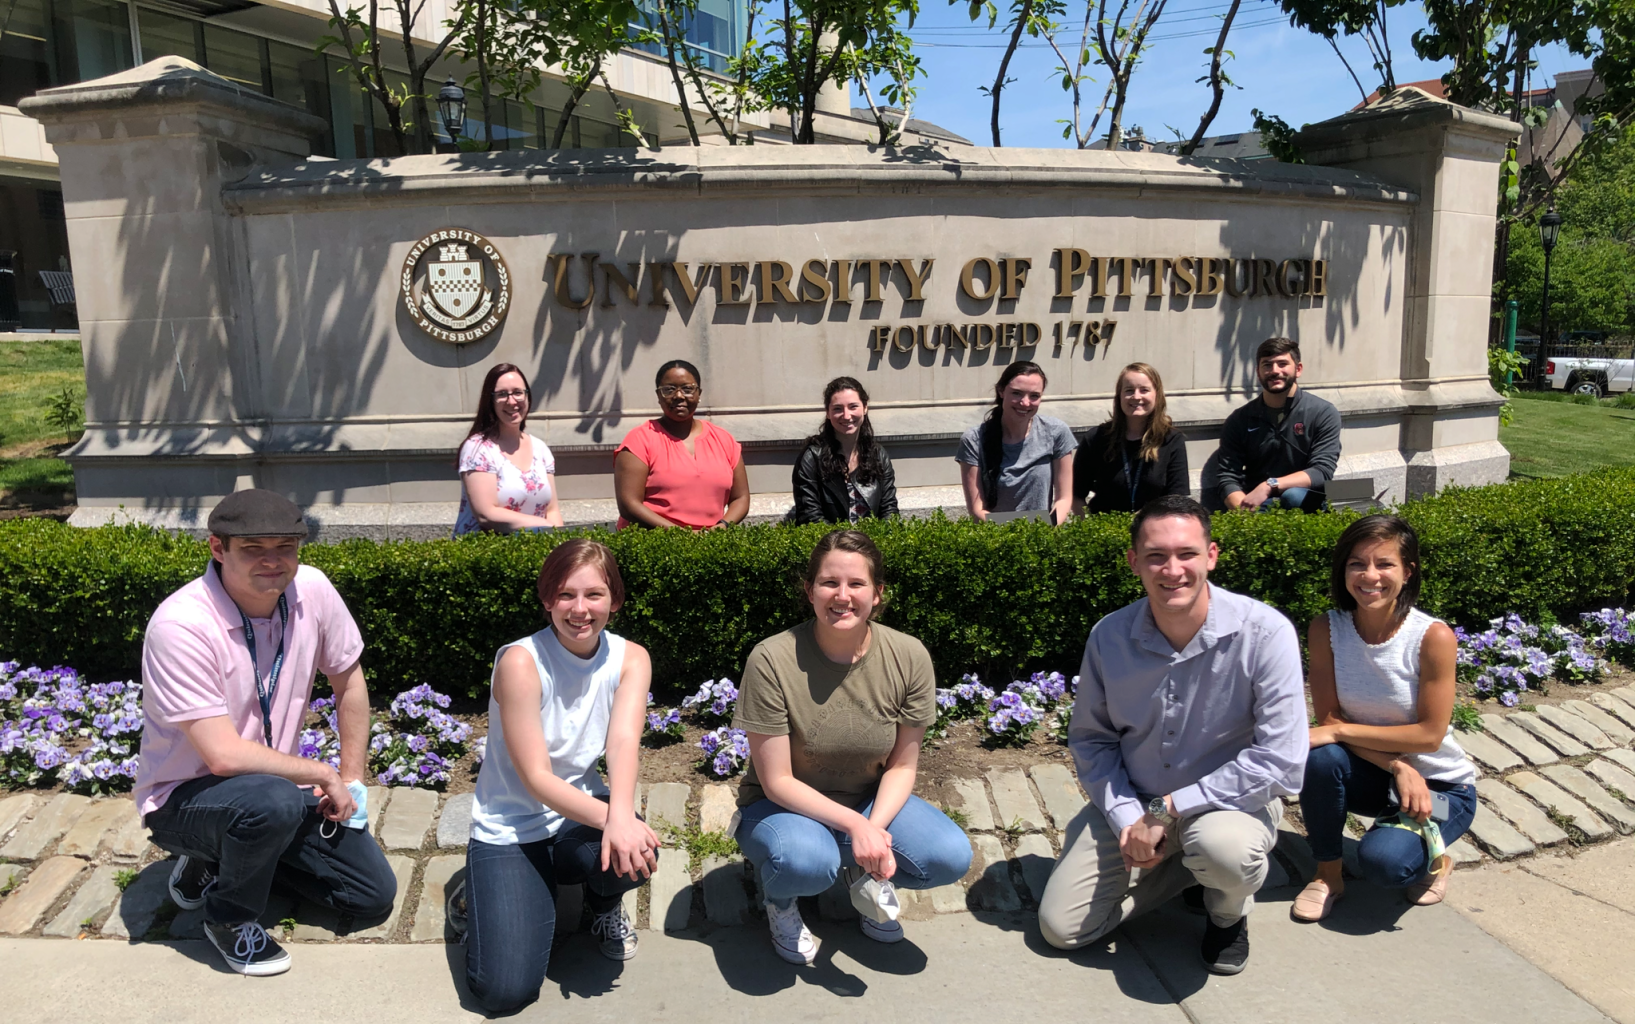 Students in front of University of Pittsburgh sign